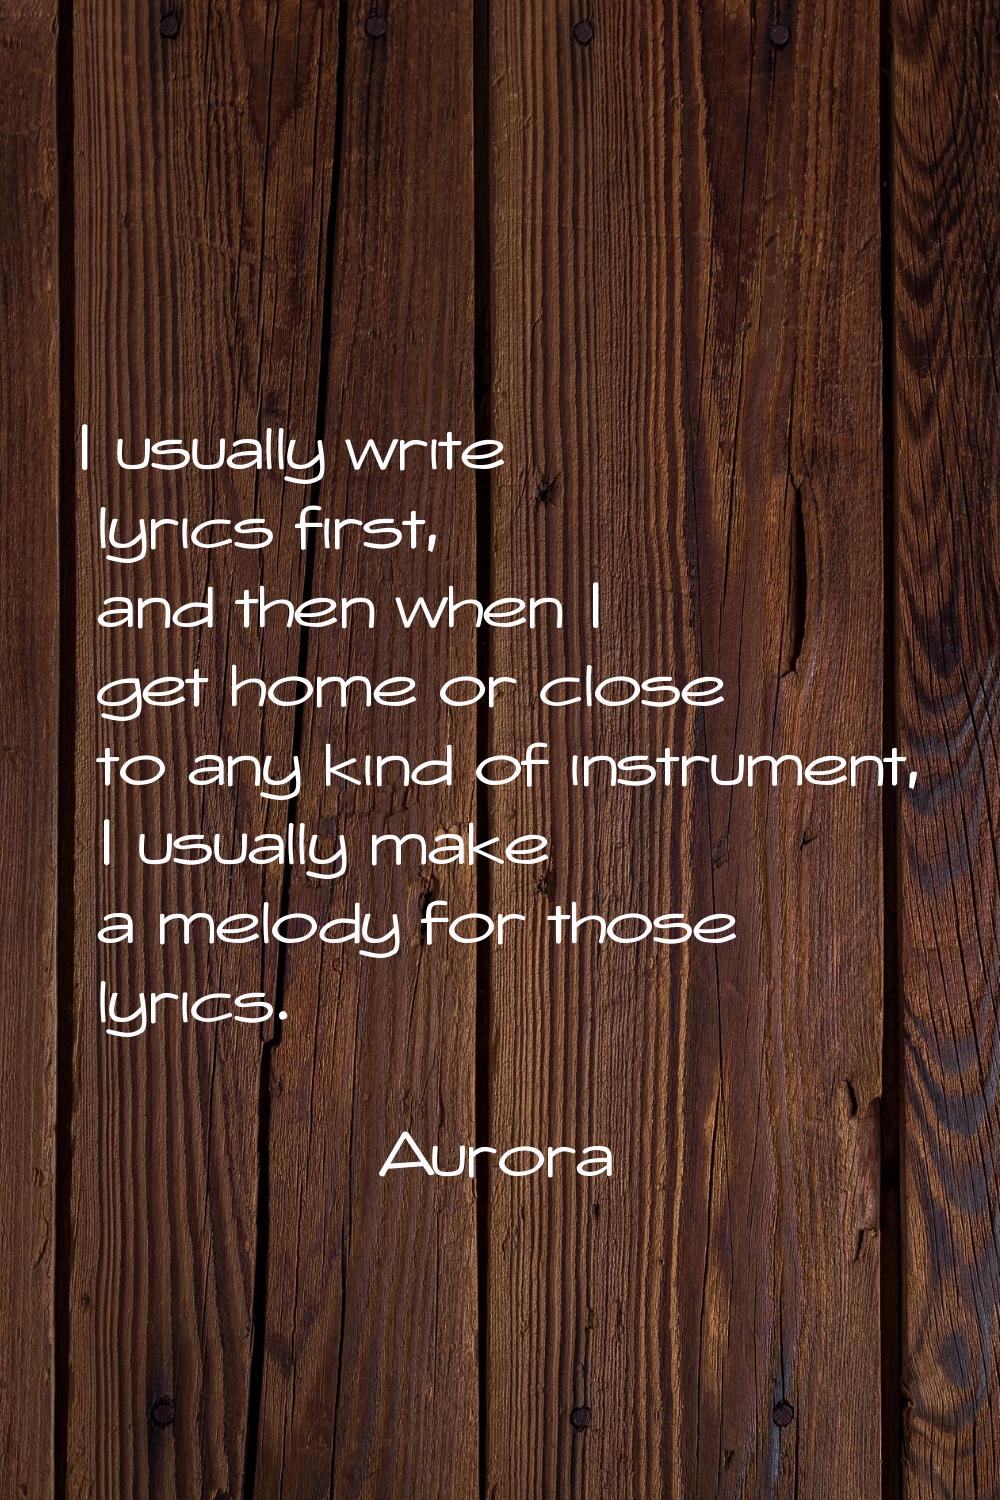 I usually write lyrics first, and then when I get home or close to any kind of instrument, I usuall